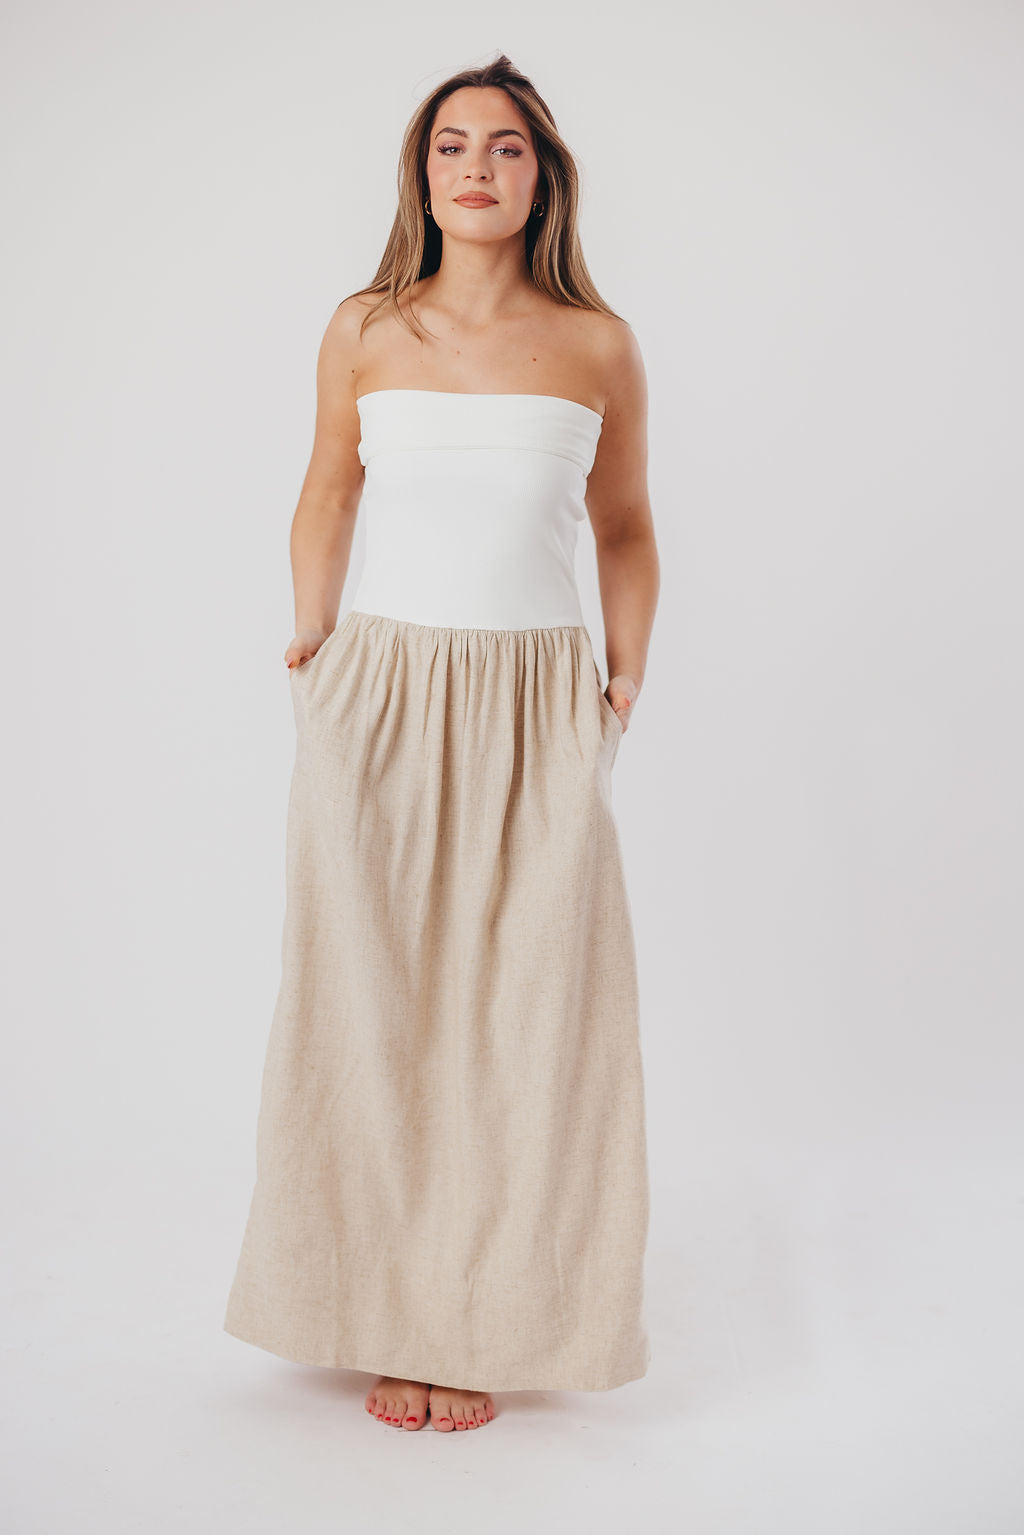 Kaylee Linen and Ribbed Knit Maxi Dress in White/Oatmeal